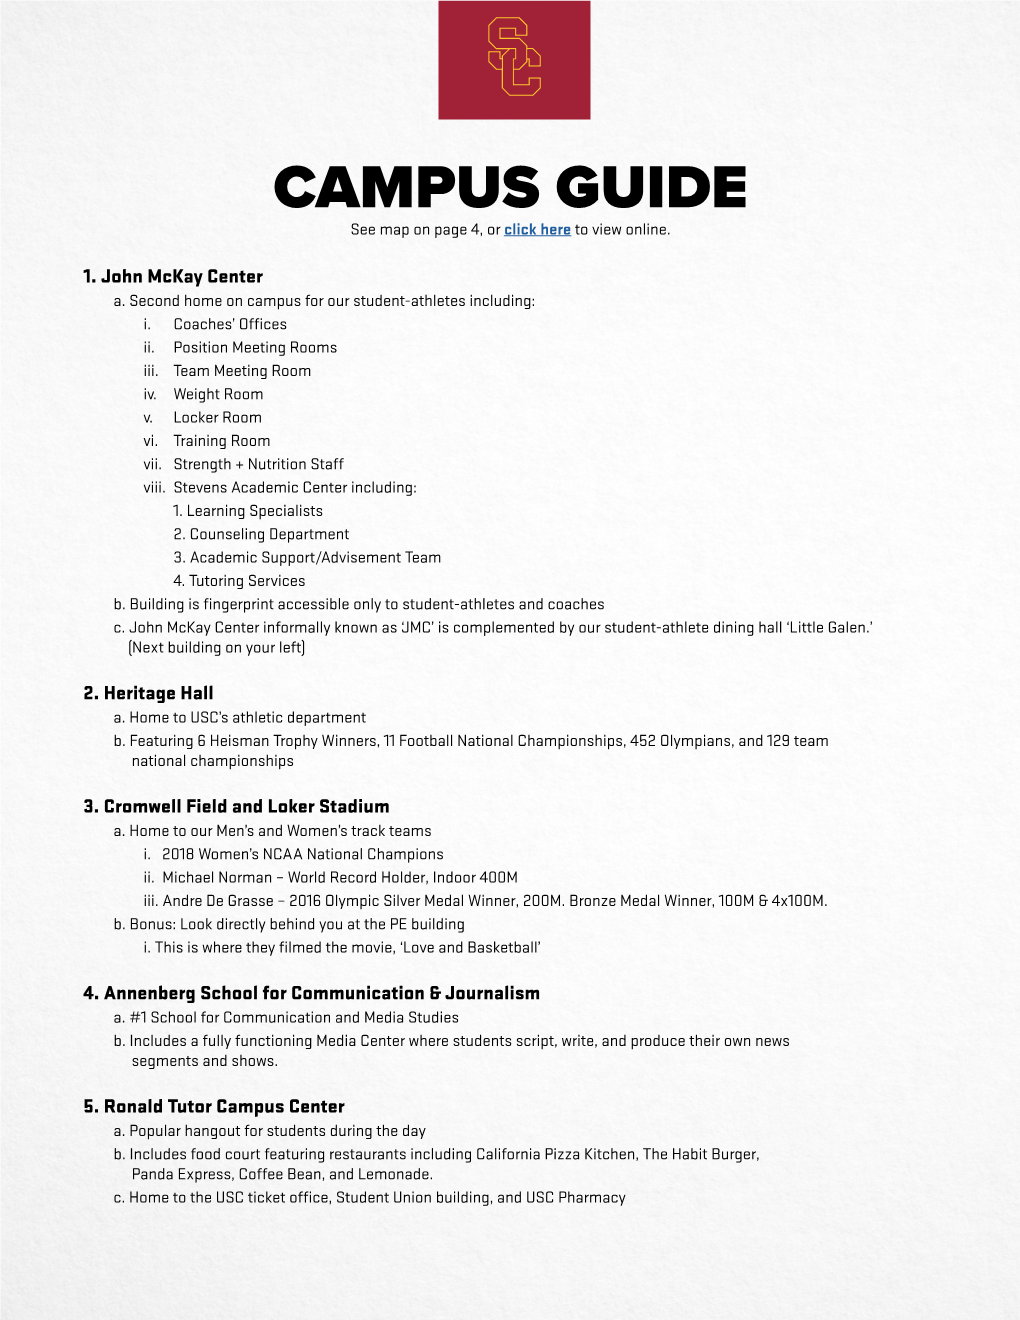 CAMPUS GUIDE See Map on Page 4, Or Click Here to View Online